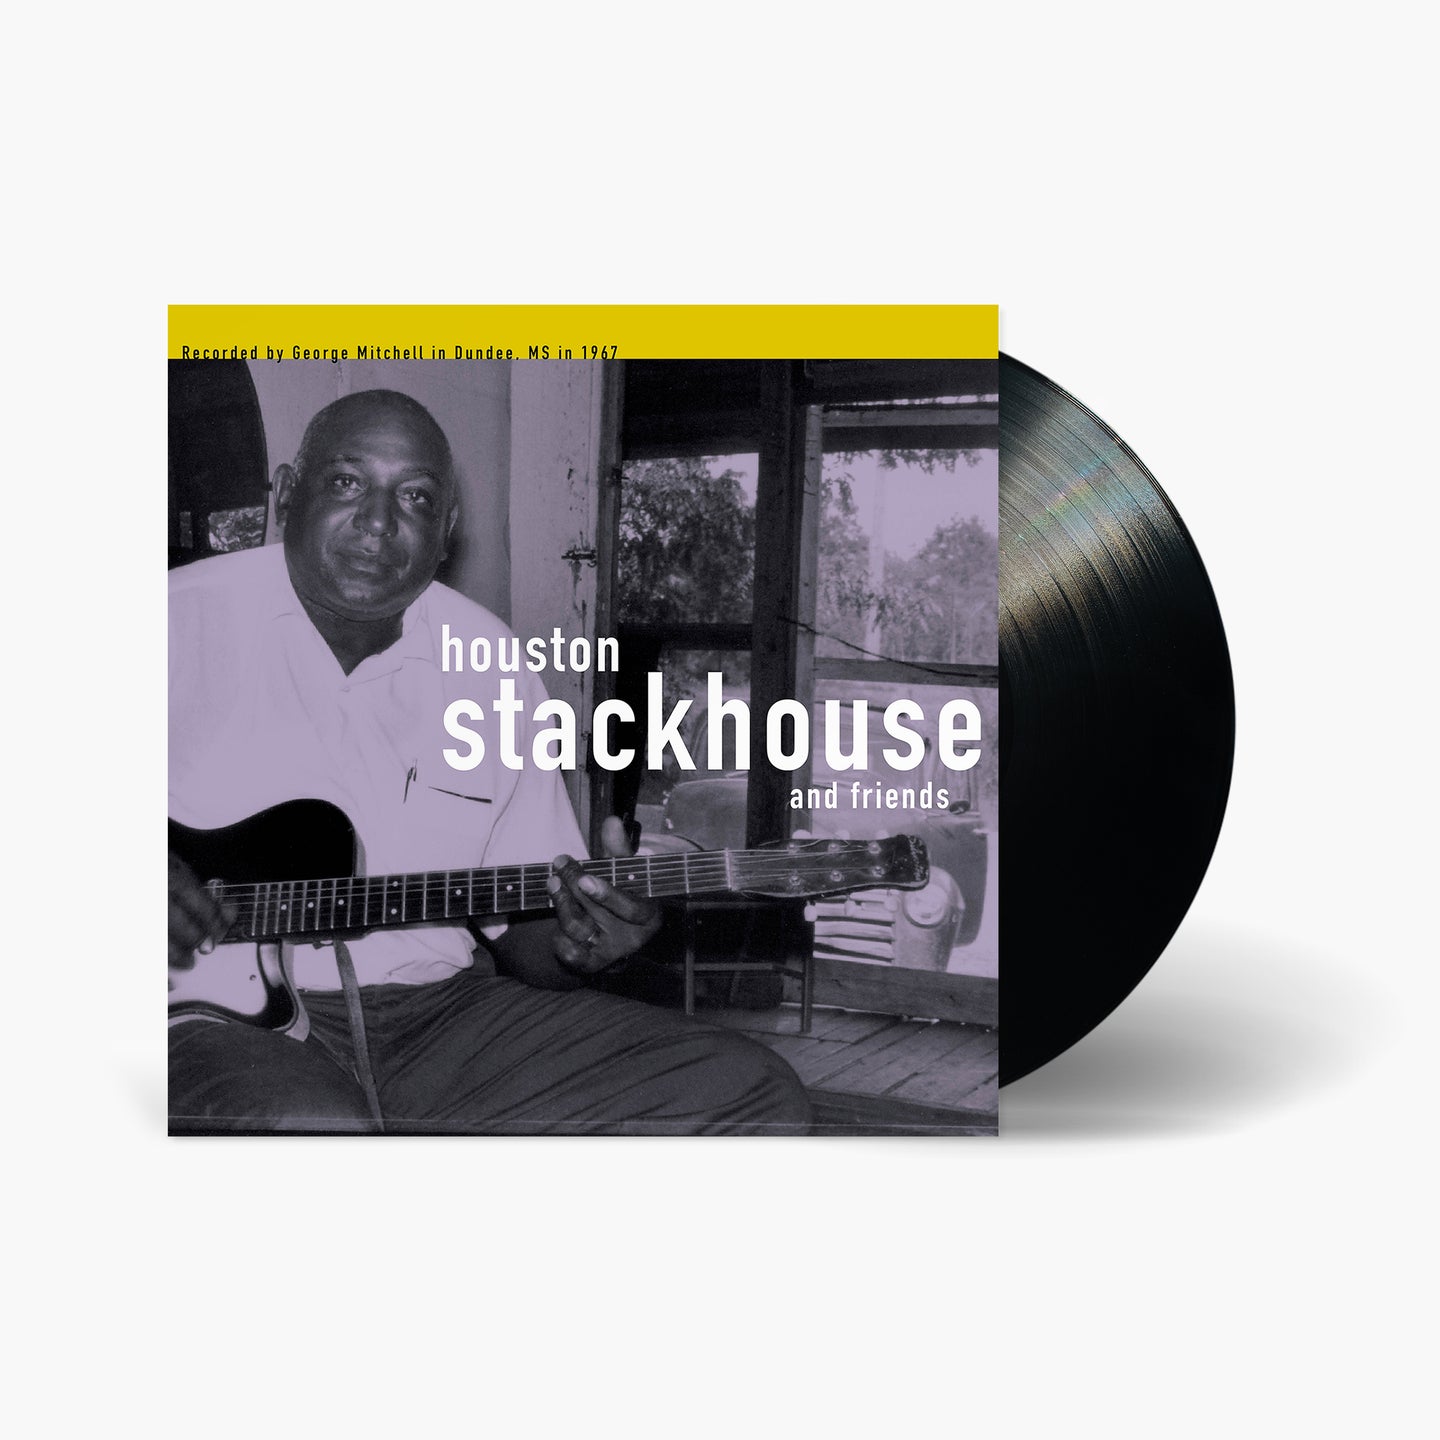 Houston Stackhouse & Friends: George Mitchell Collection